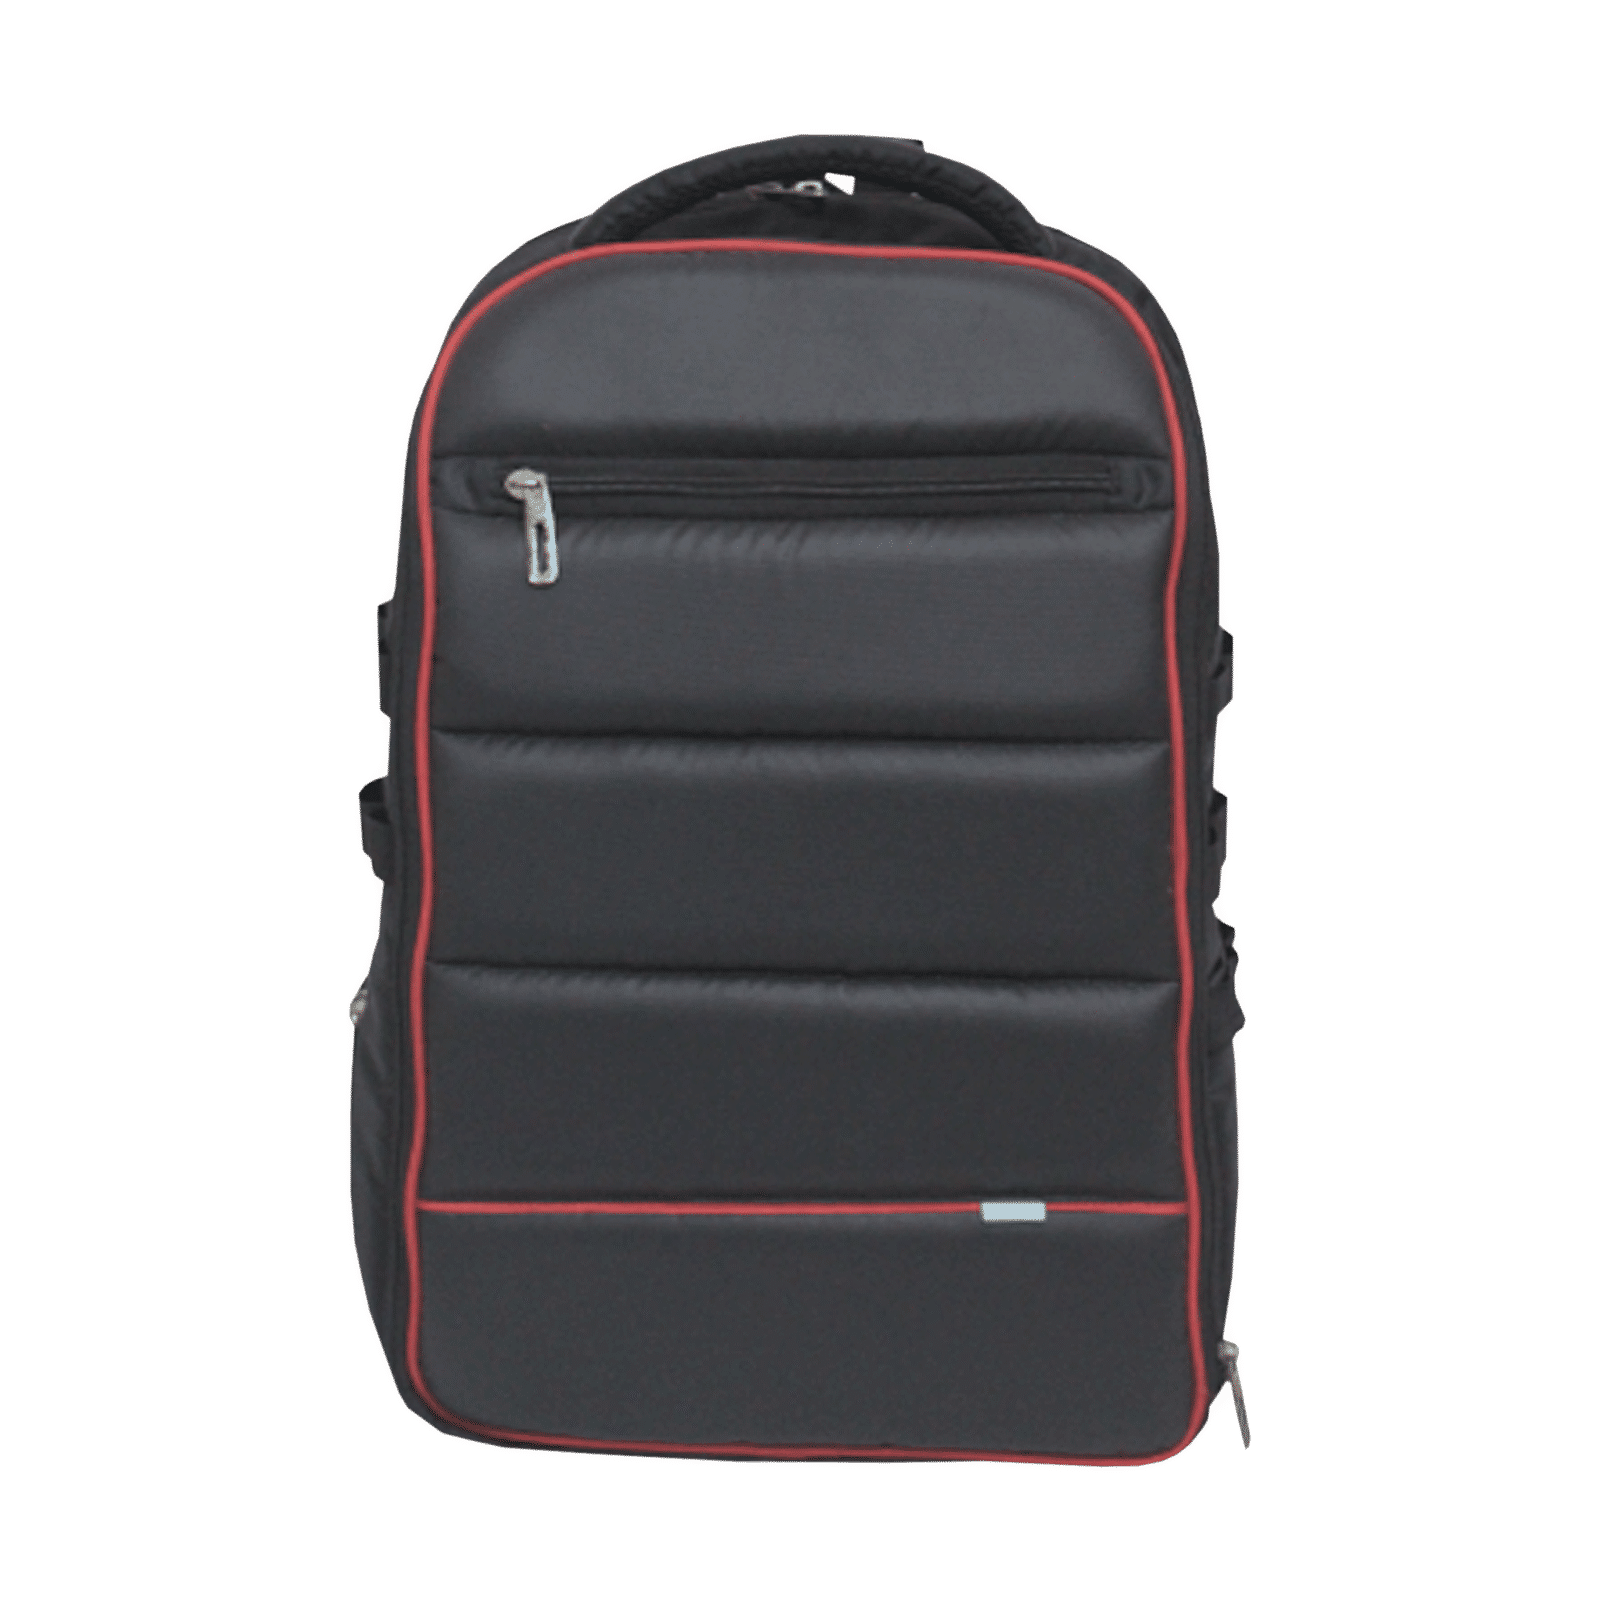 EMS Trauma Bag First-In with Oxygen | Ruffian Specialties